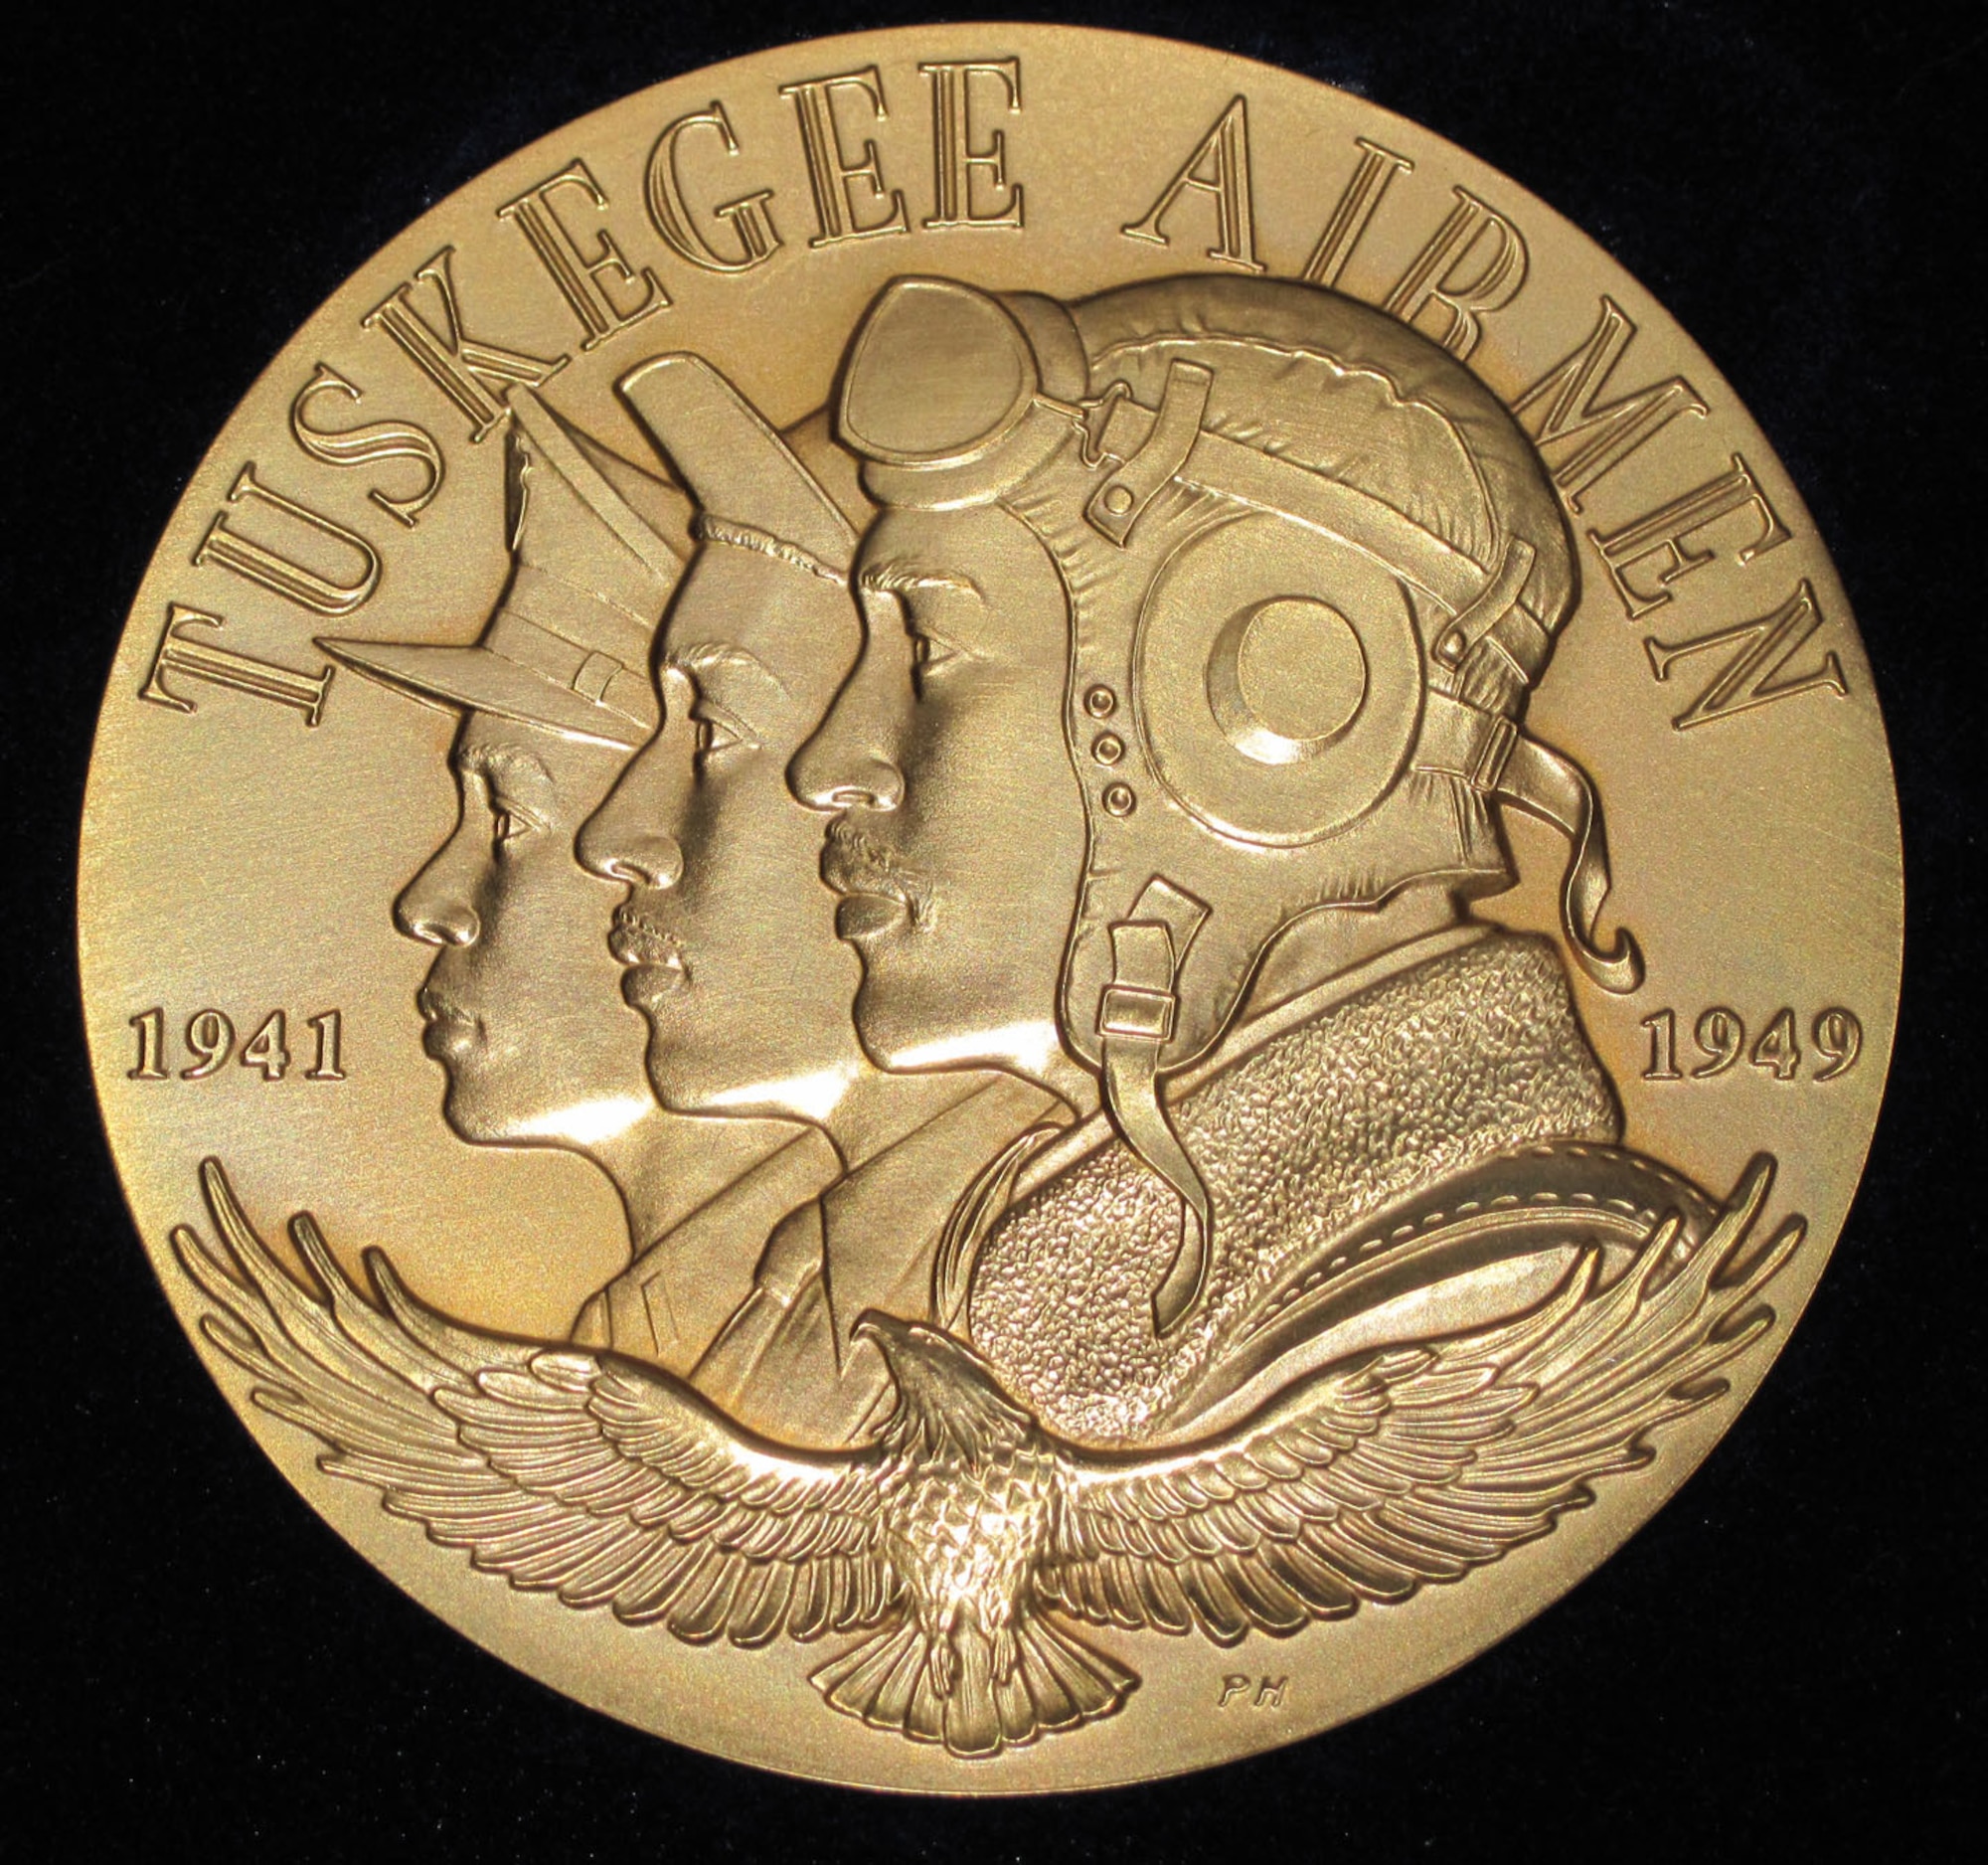 On March 29, 2007, approximately 350 Tuskegee Airmen (or their widows) received the Congressional Gold Medal for their bravery during World War II. The original is at the Smithsonian. This one is one of the bronze replicas given to the individual recipients. (U.S. Air Force photo)